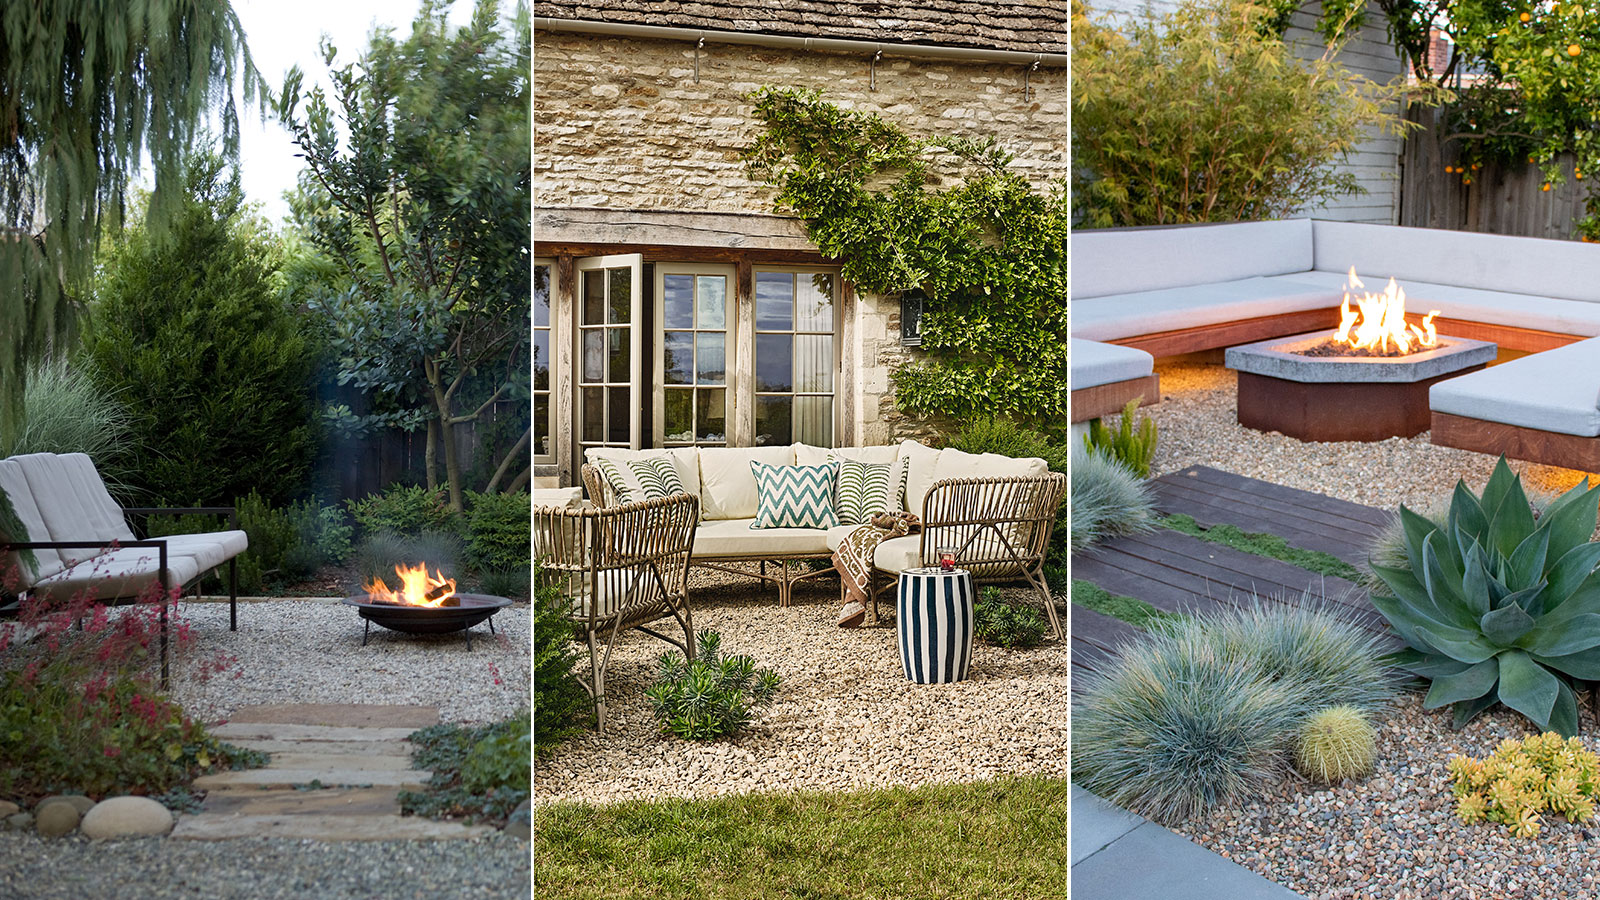 Gravel Patio Ideas: 12 Ways To Create A Chic Seating Area |